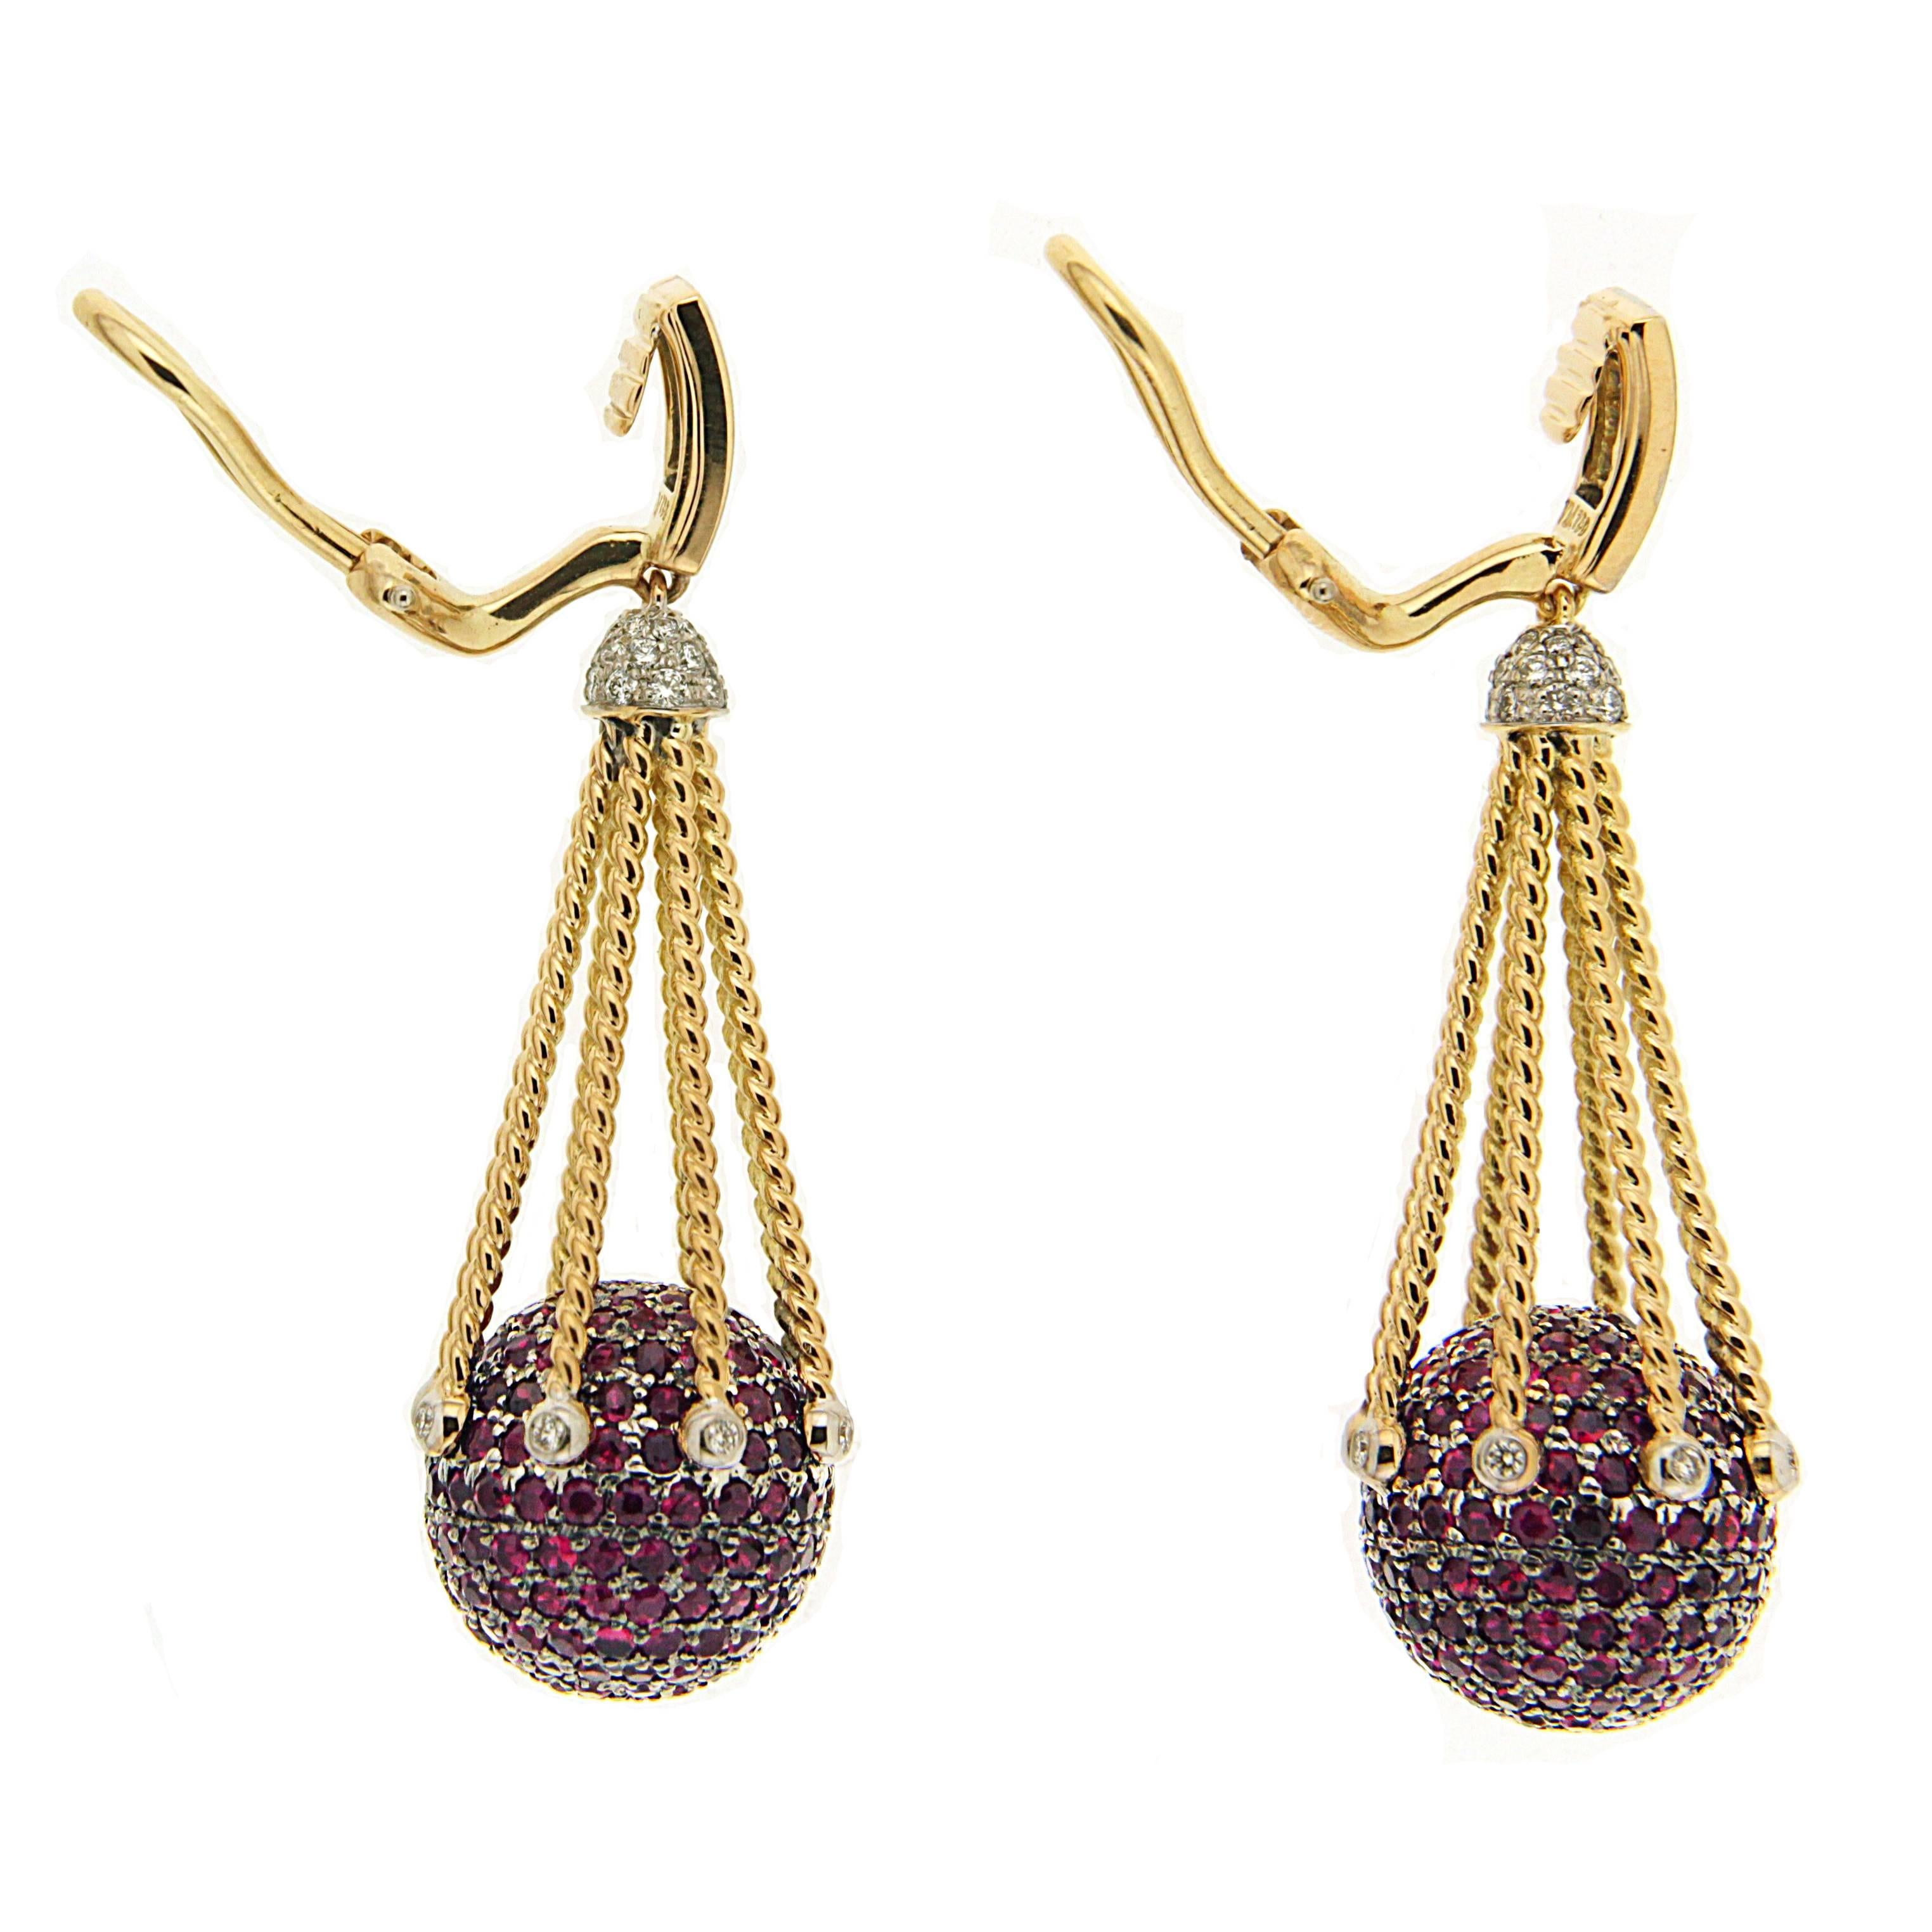 One of the most unique jewelry designs, this elegant pair of earrings features Ruby pave balls with diamond caps on the top connected by multiple gold twisted ropes and ended with bezel set diamond accents. The earring is finished in 18kt Yellow